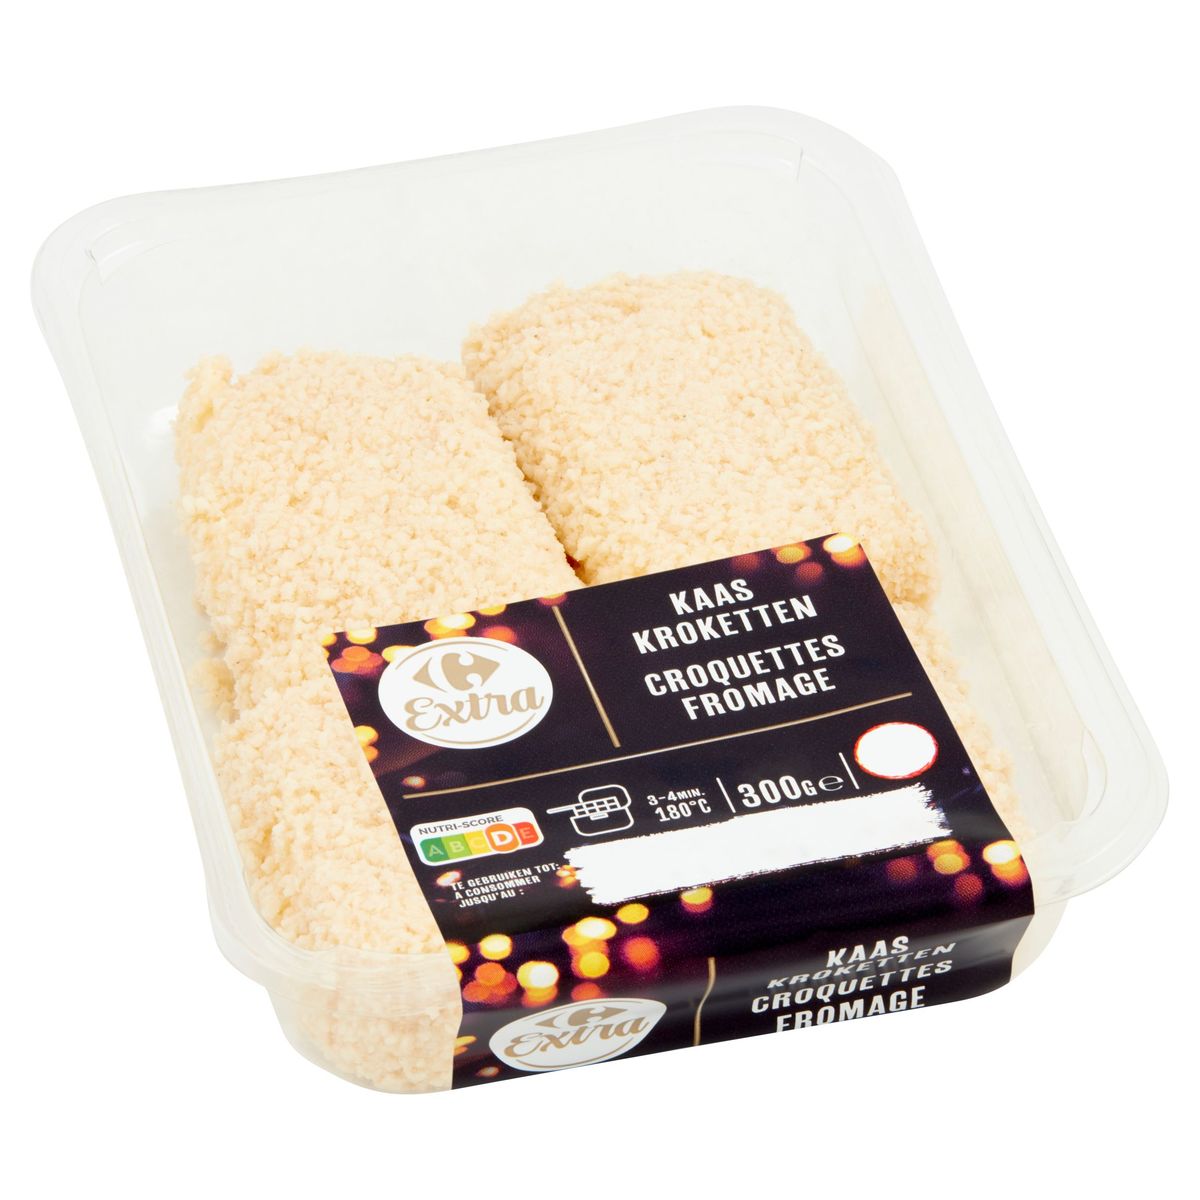 Carrefour Extra Croquettes Fromage 300 g